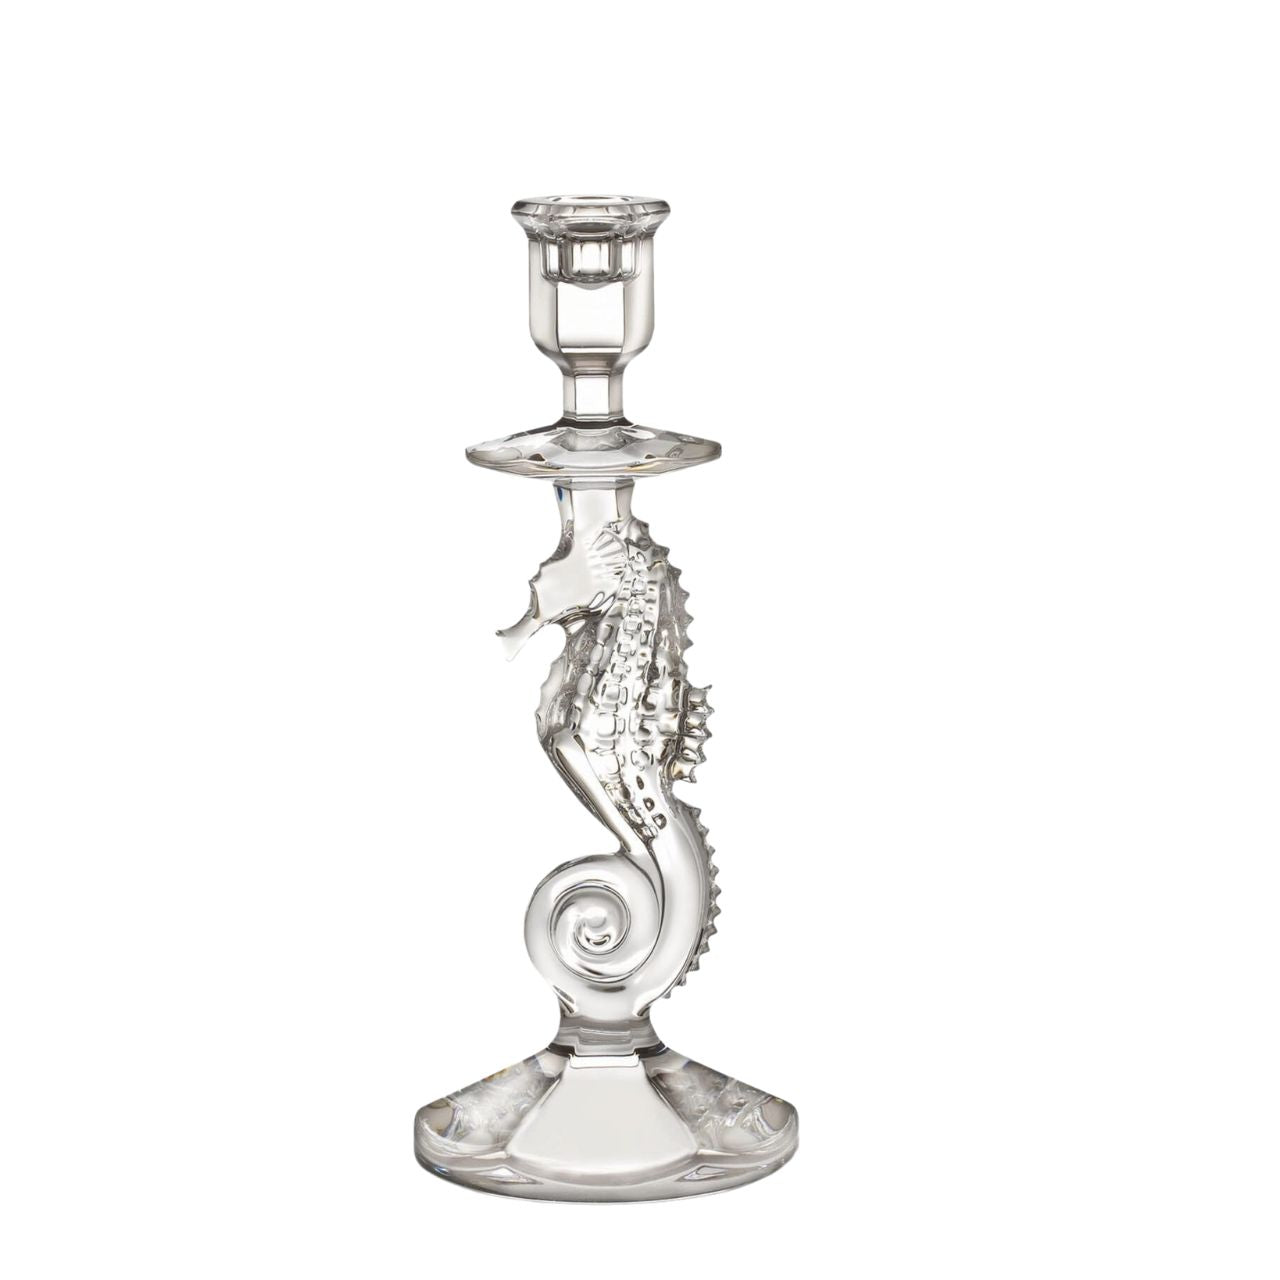 Waterford Crystal ﻿Seahorse Candlestick  A dramatic statement piece, the Collection by Waterford takes inspiration from the logo of the Waterford company and the crest of the historical city of Waterford, where Ireland's premiere fine crystal is produced. This elegant candlestick combines the intricate detailing of the pattern with the comforting weight and stability of Waterford's hand-crafted, fine crystal.